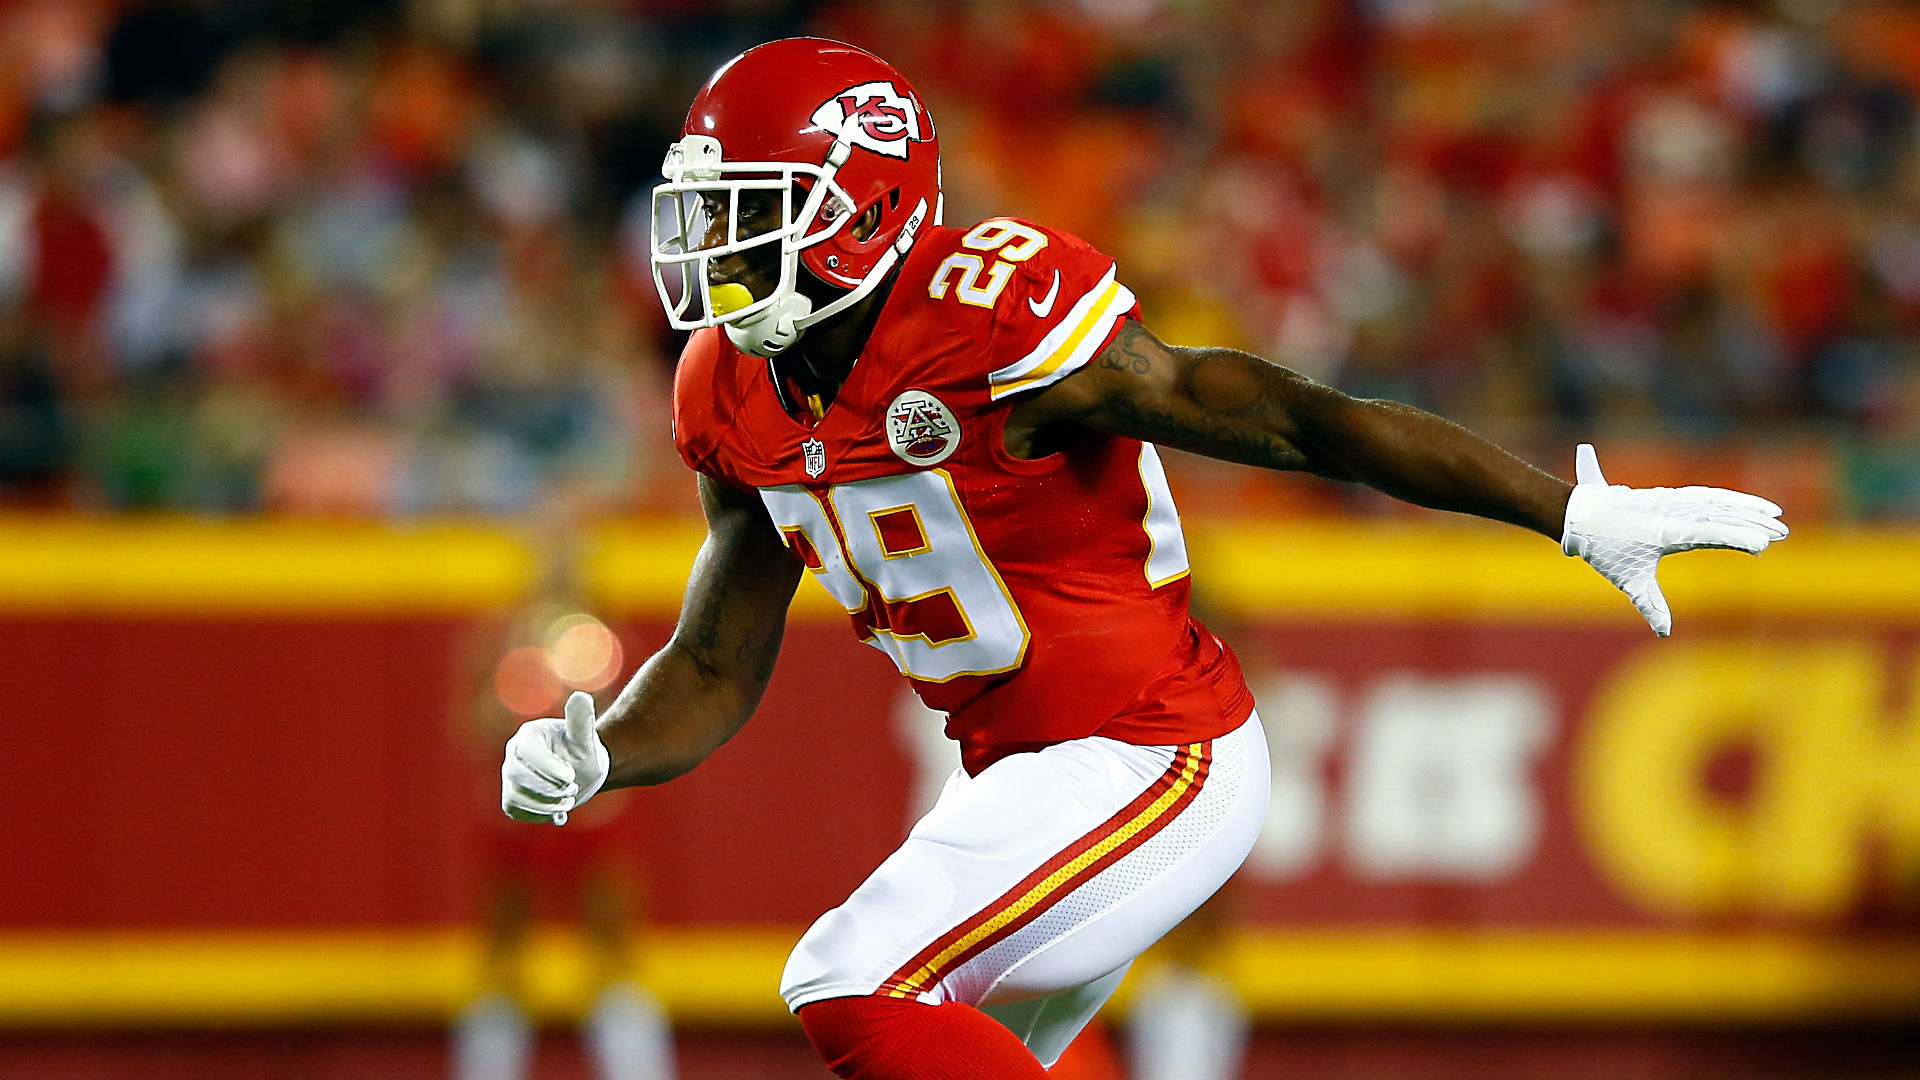 Eric Berry comes full circle with pivotal interception, celebration ...